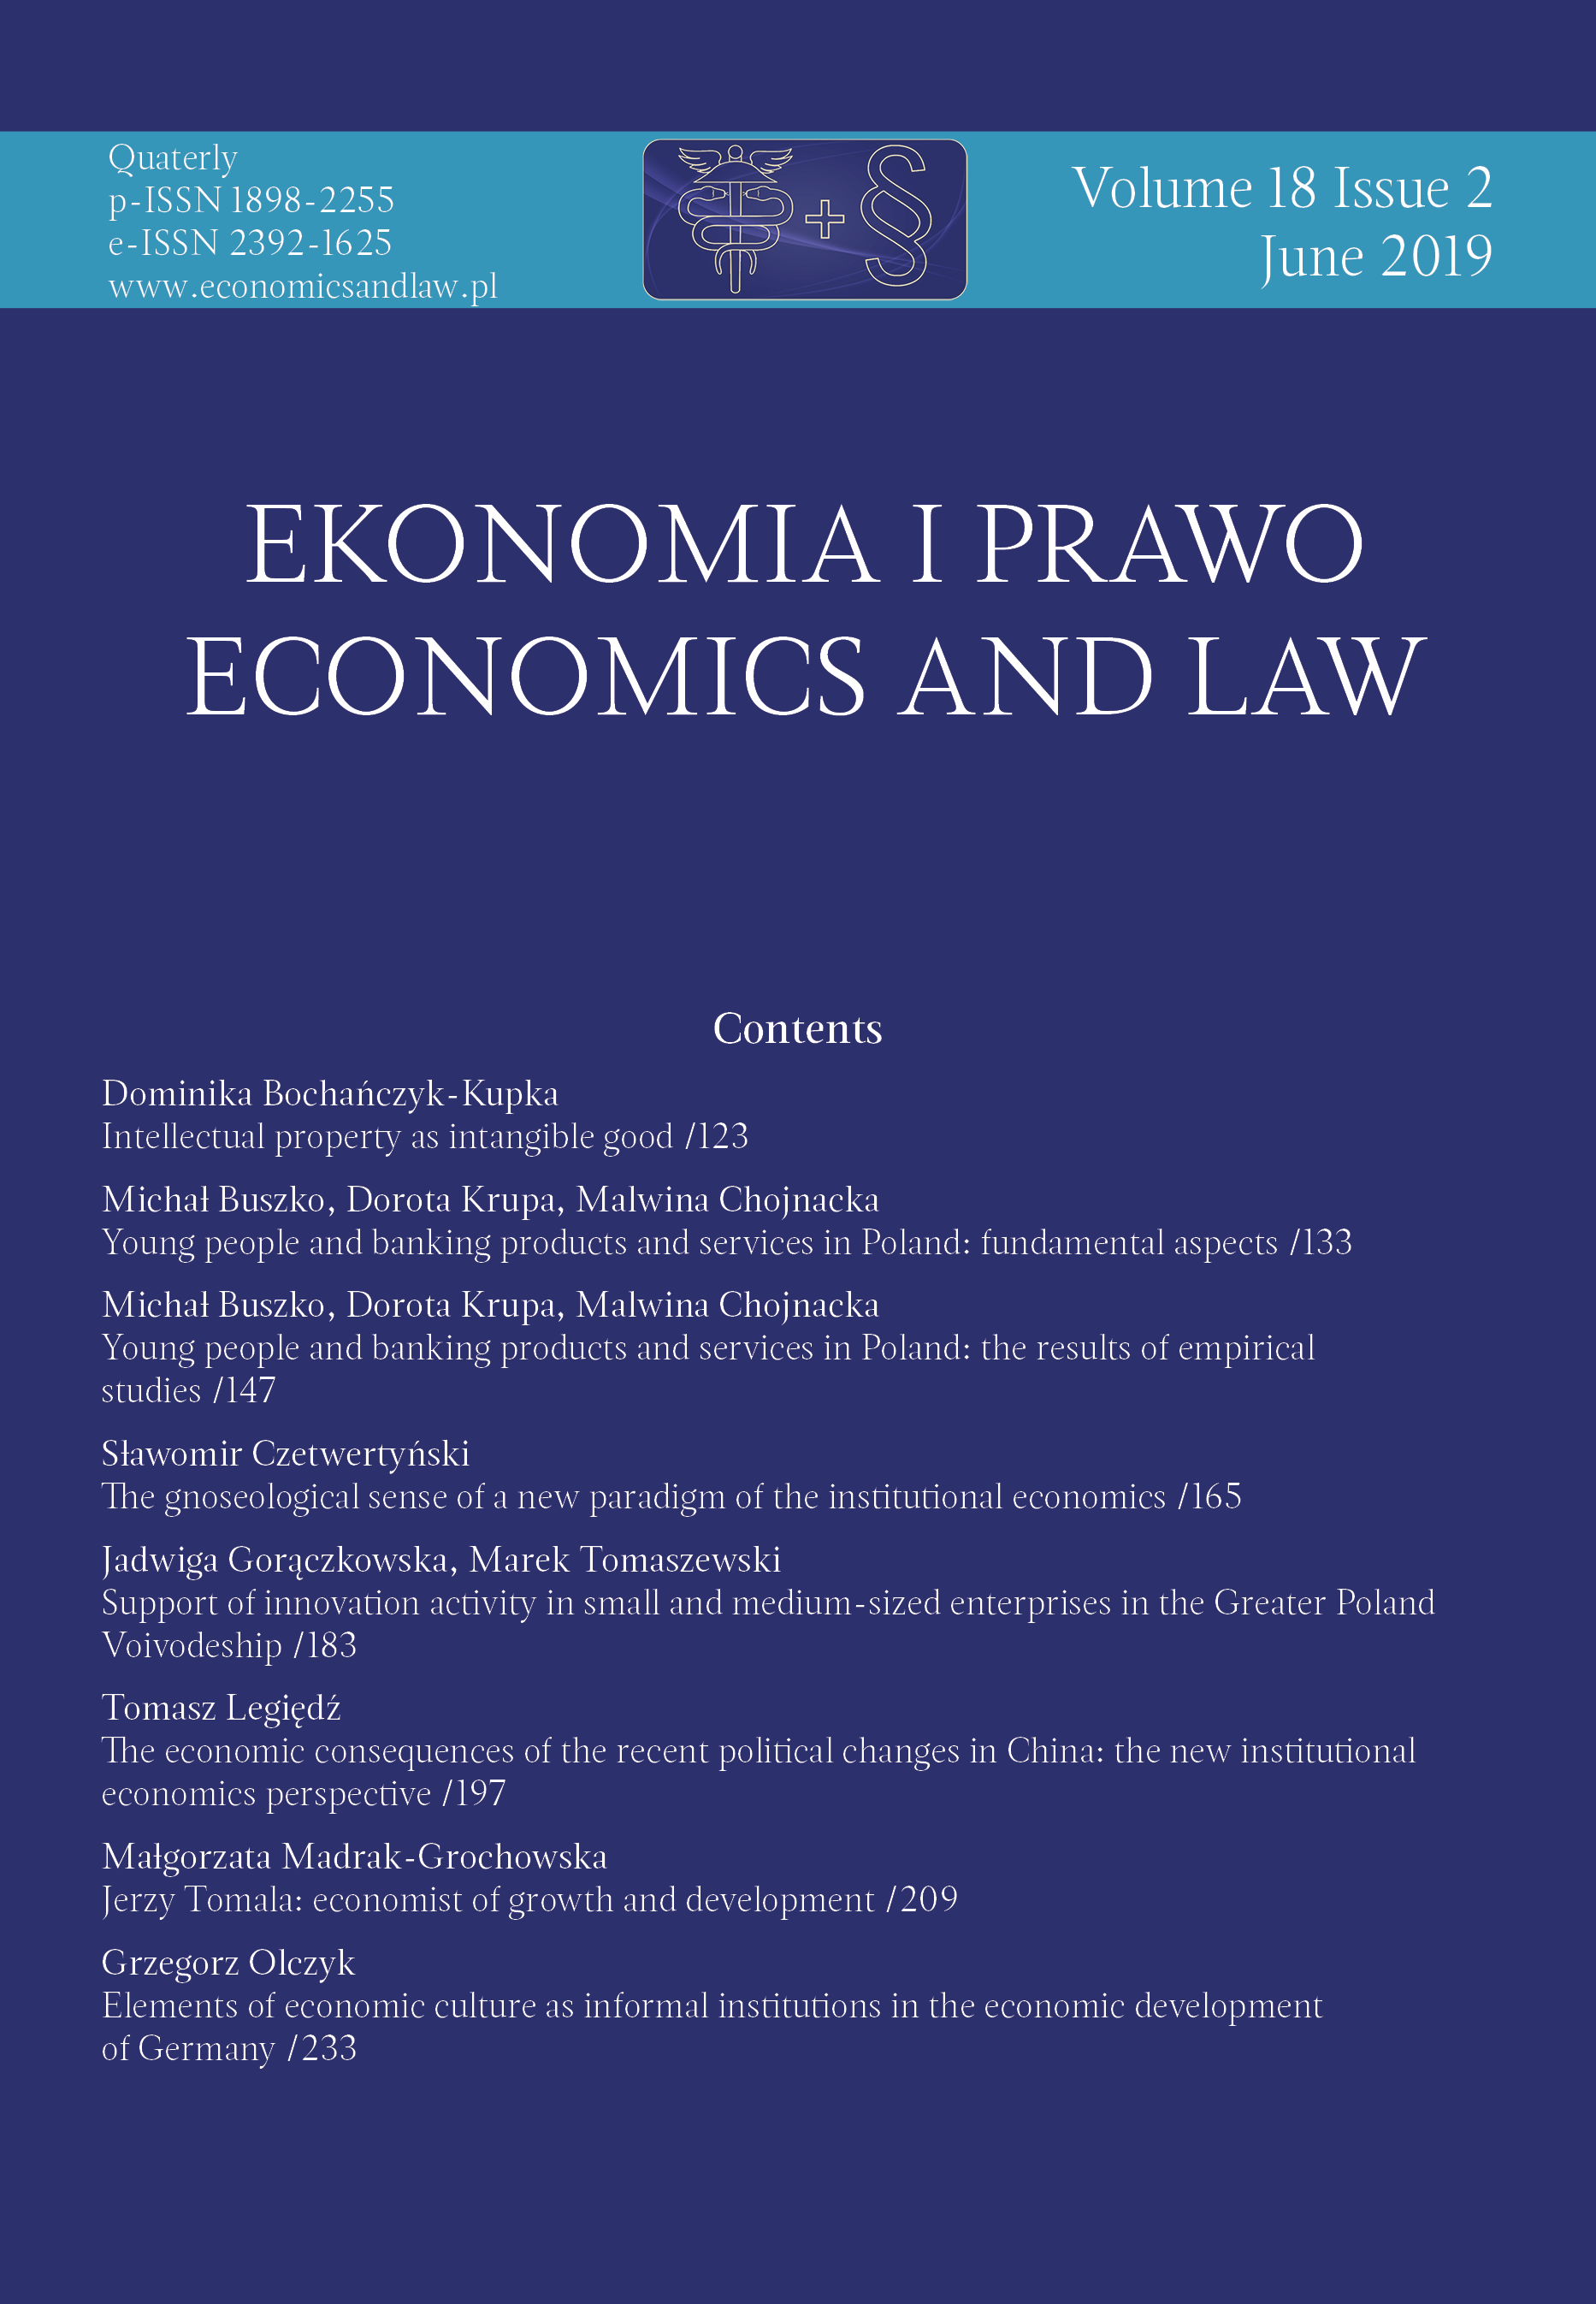 The economic consequences of the recent political changes in China: the new institutional economics perspective Cover Image